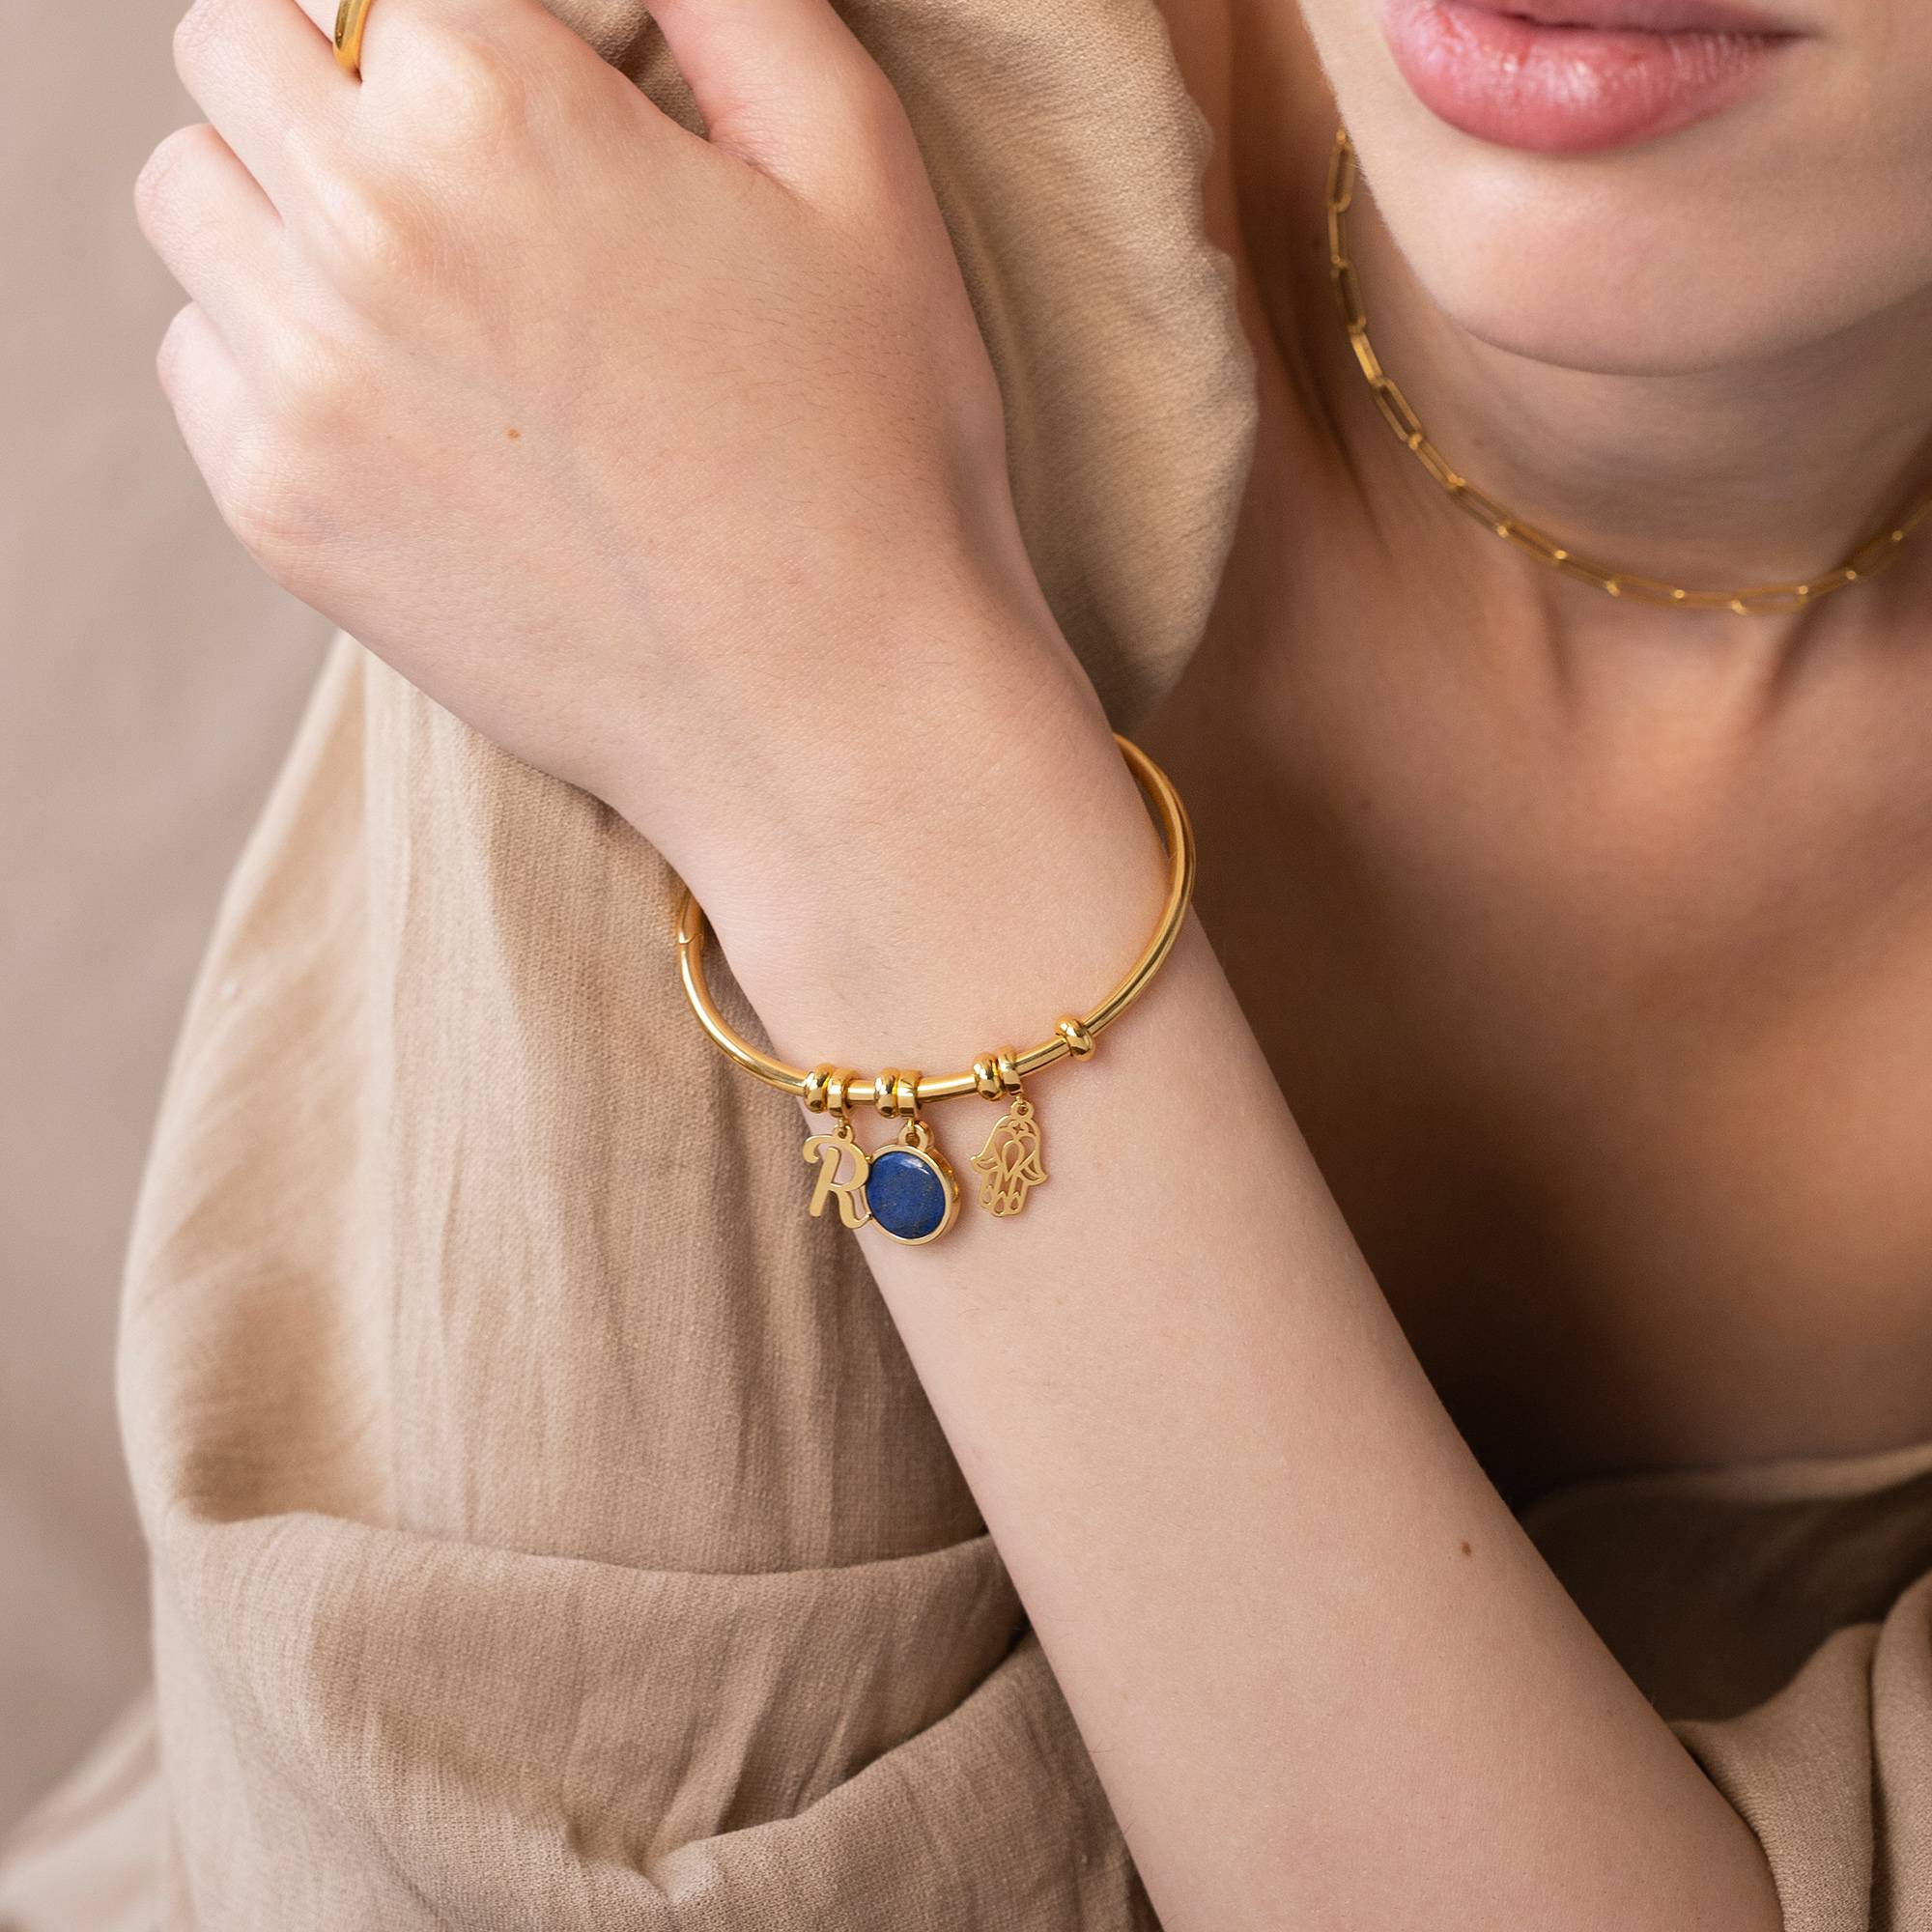 Symbolic Initial Bangle Bracelet with Semi-Precious Stone in 18K Gold Vermeil-4 product photo